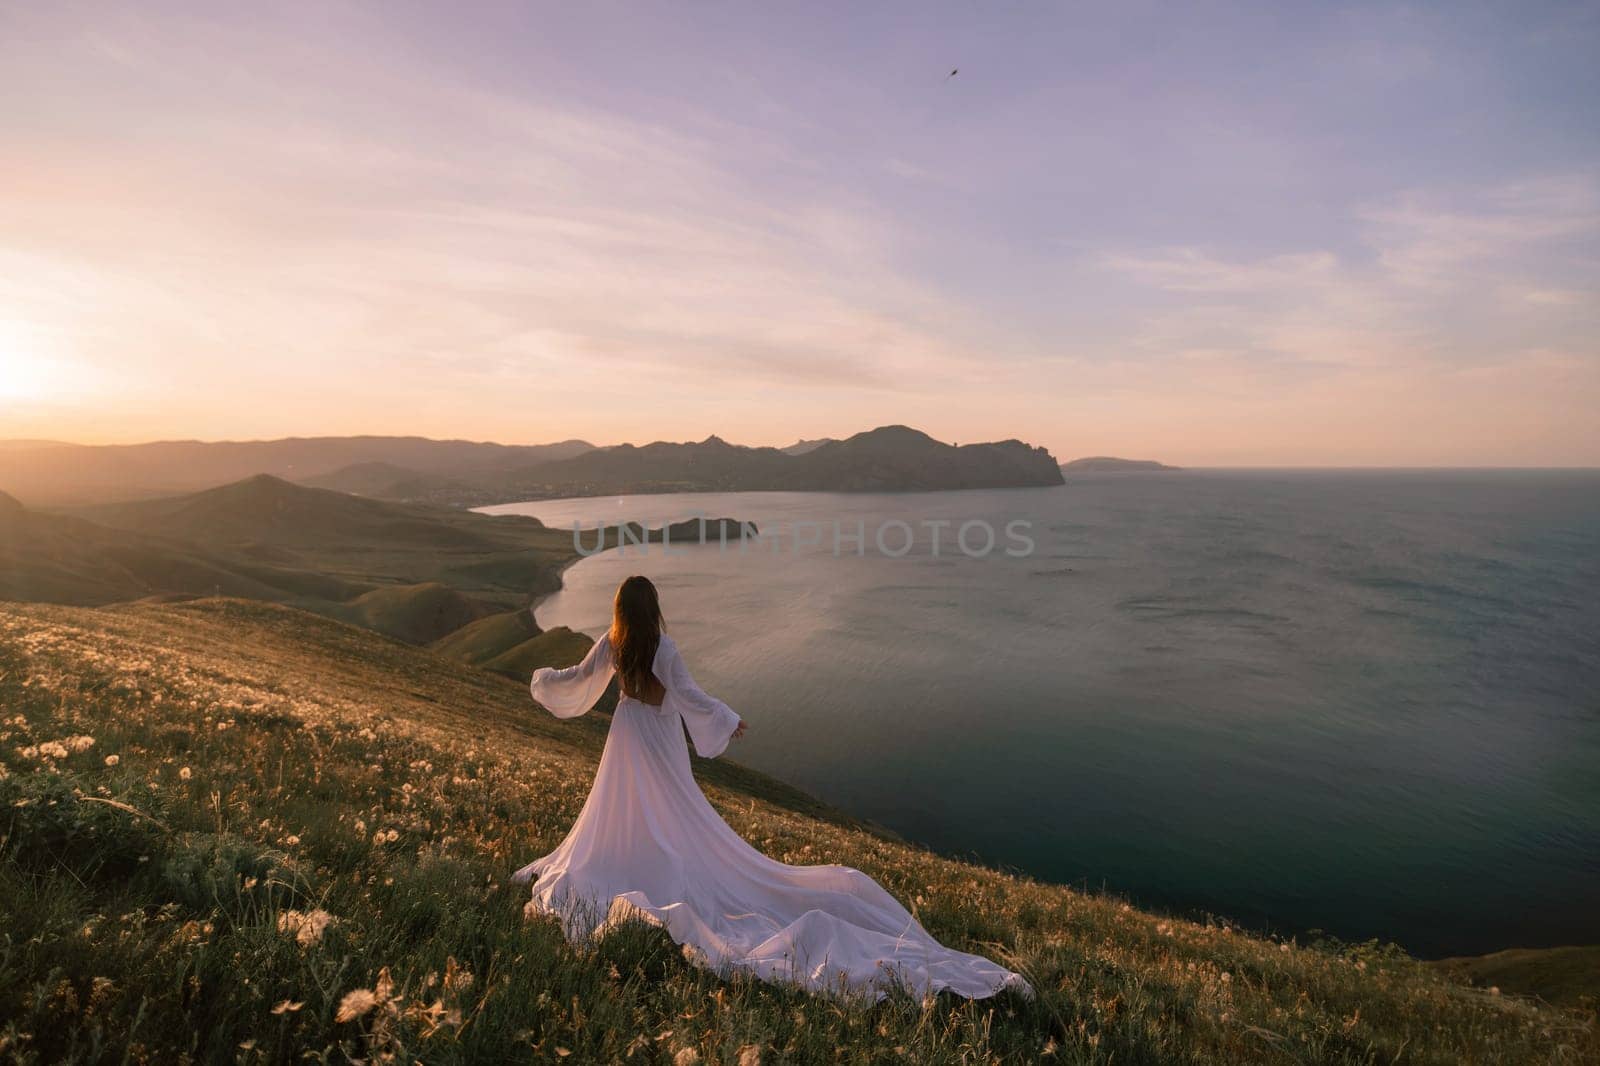 A woman in a white dress stands on a hill overlooking a body of water. The scene is serene and peaceful, with the woman's dress billowing in the wind. The combination of the woman's elegant attire. by Matiunina